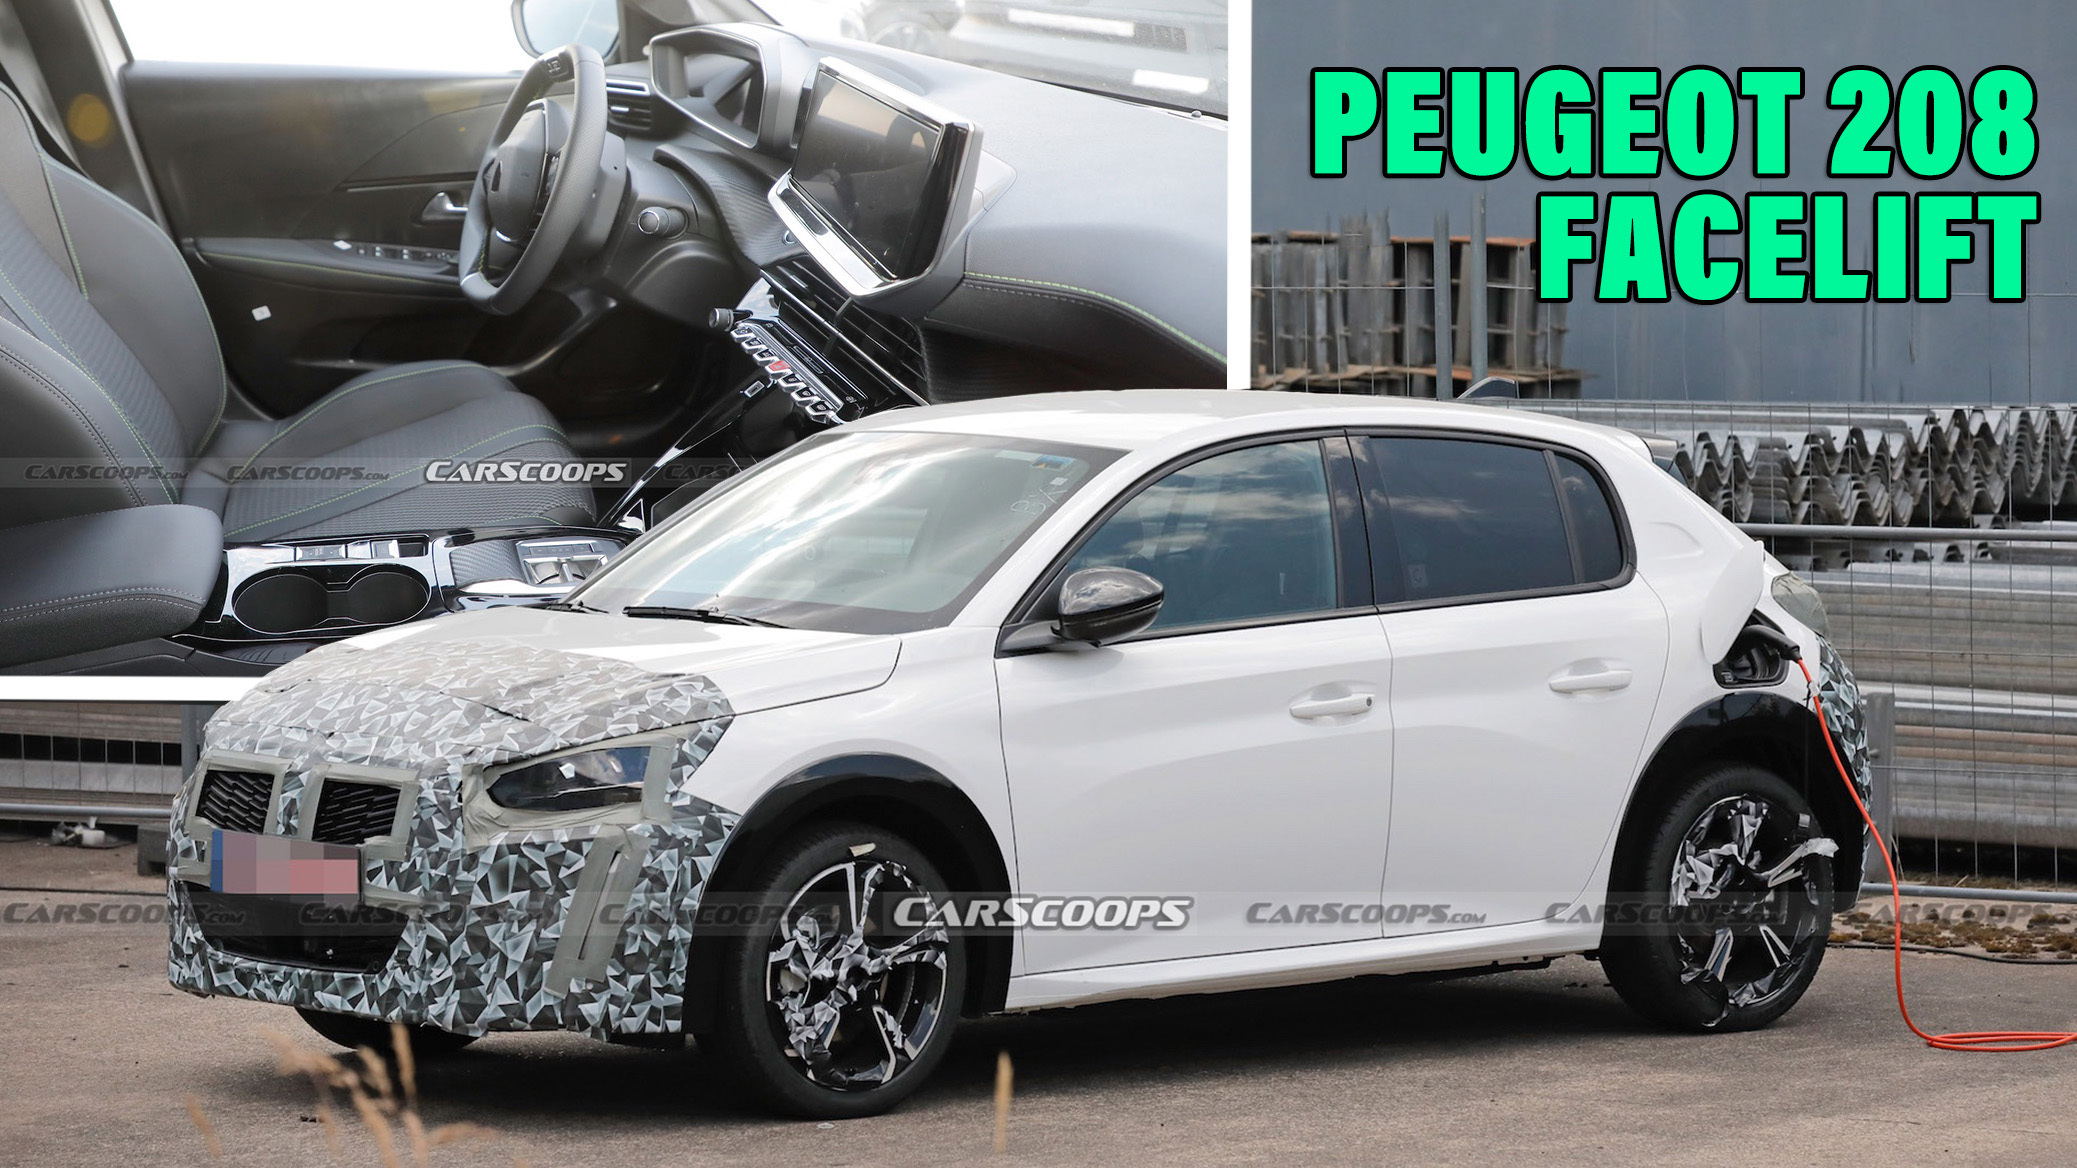 New Peugeot 208 gets some extra fangs